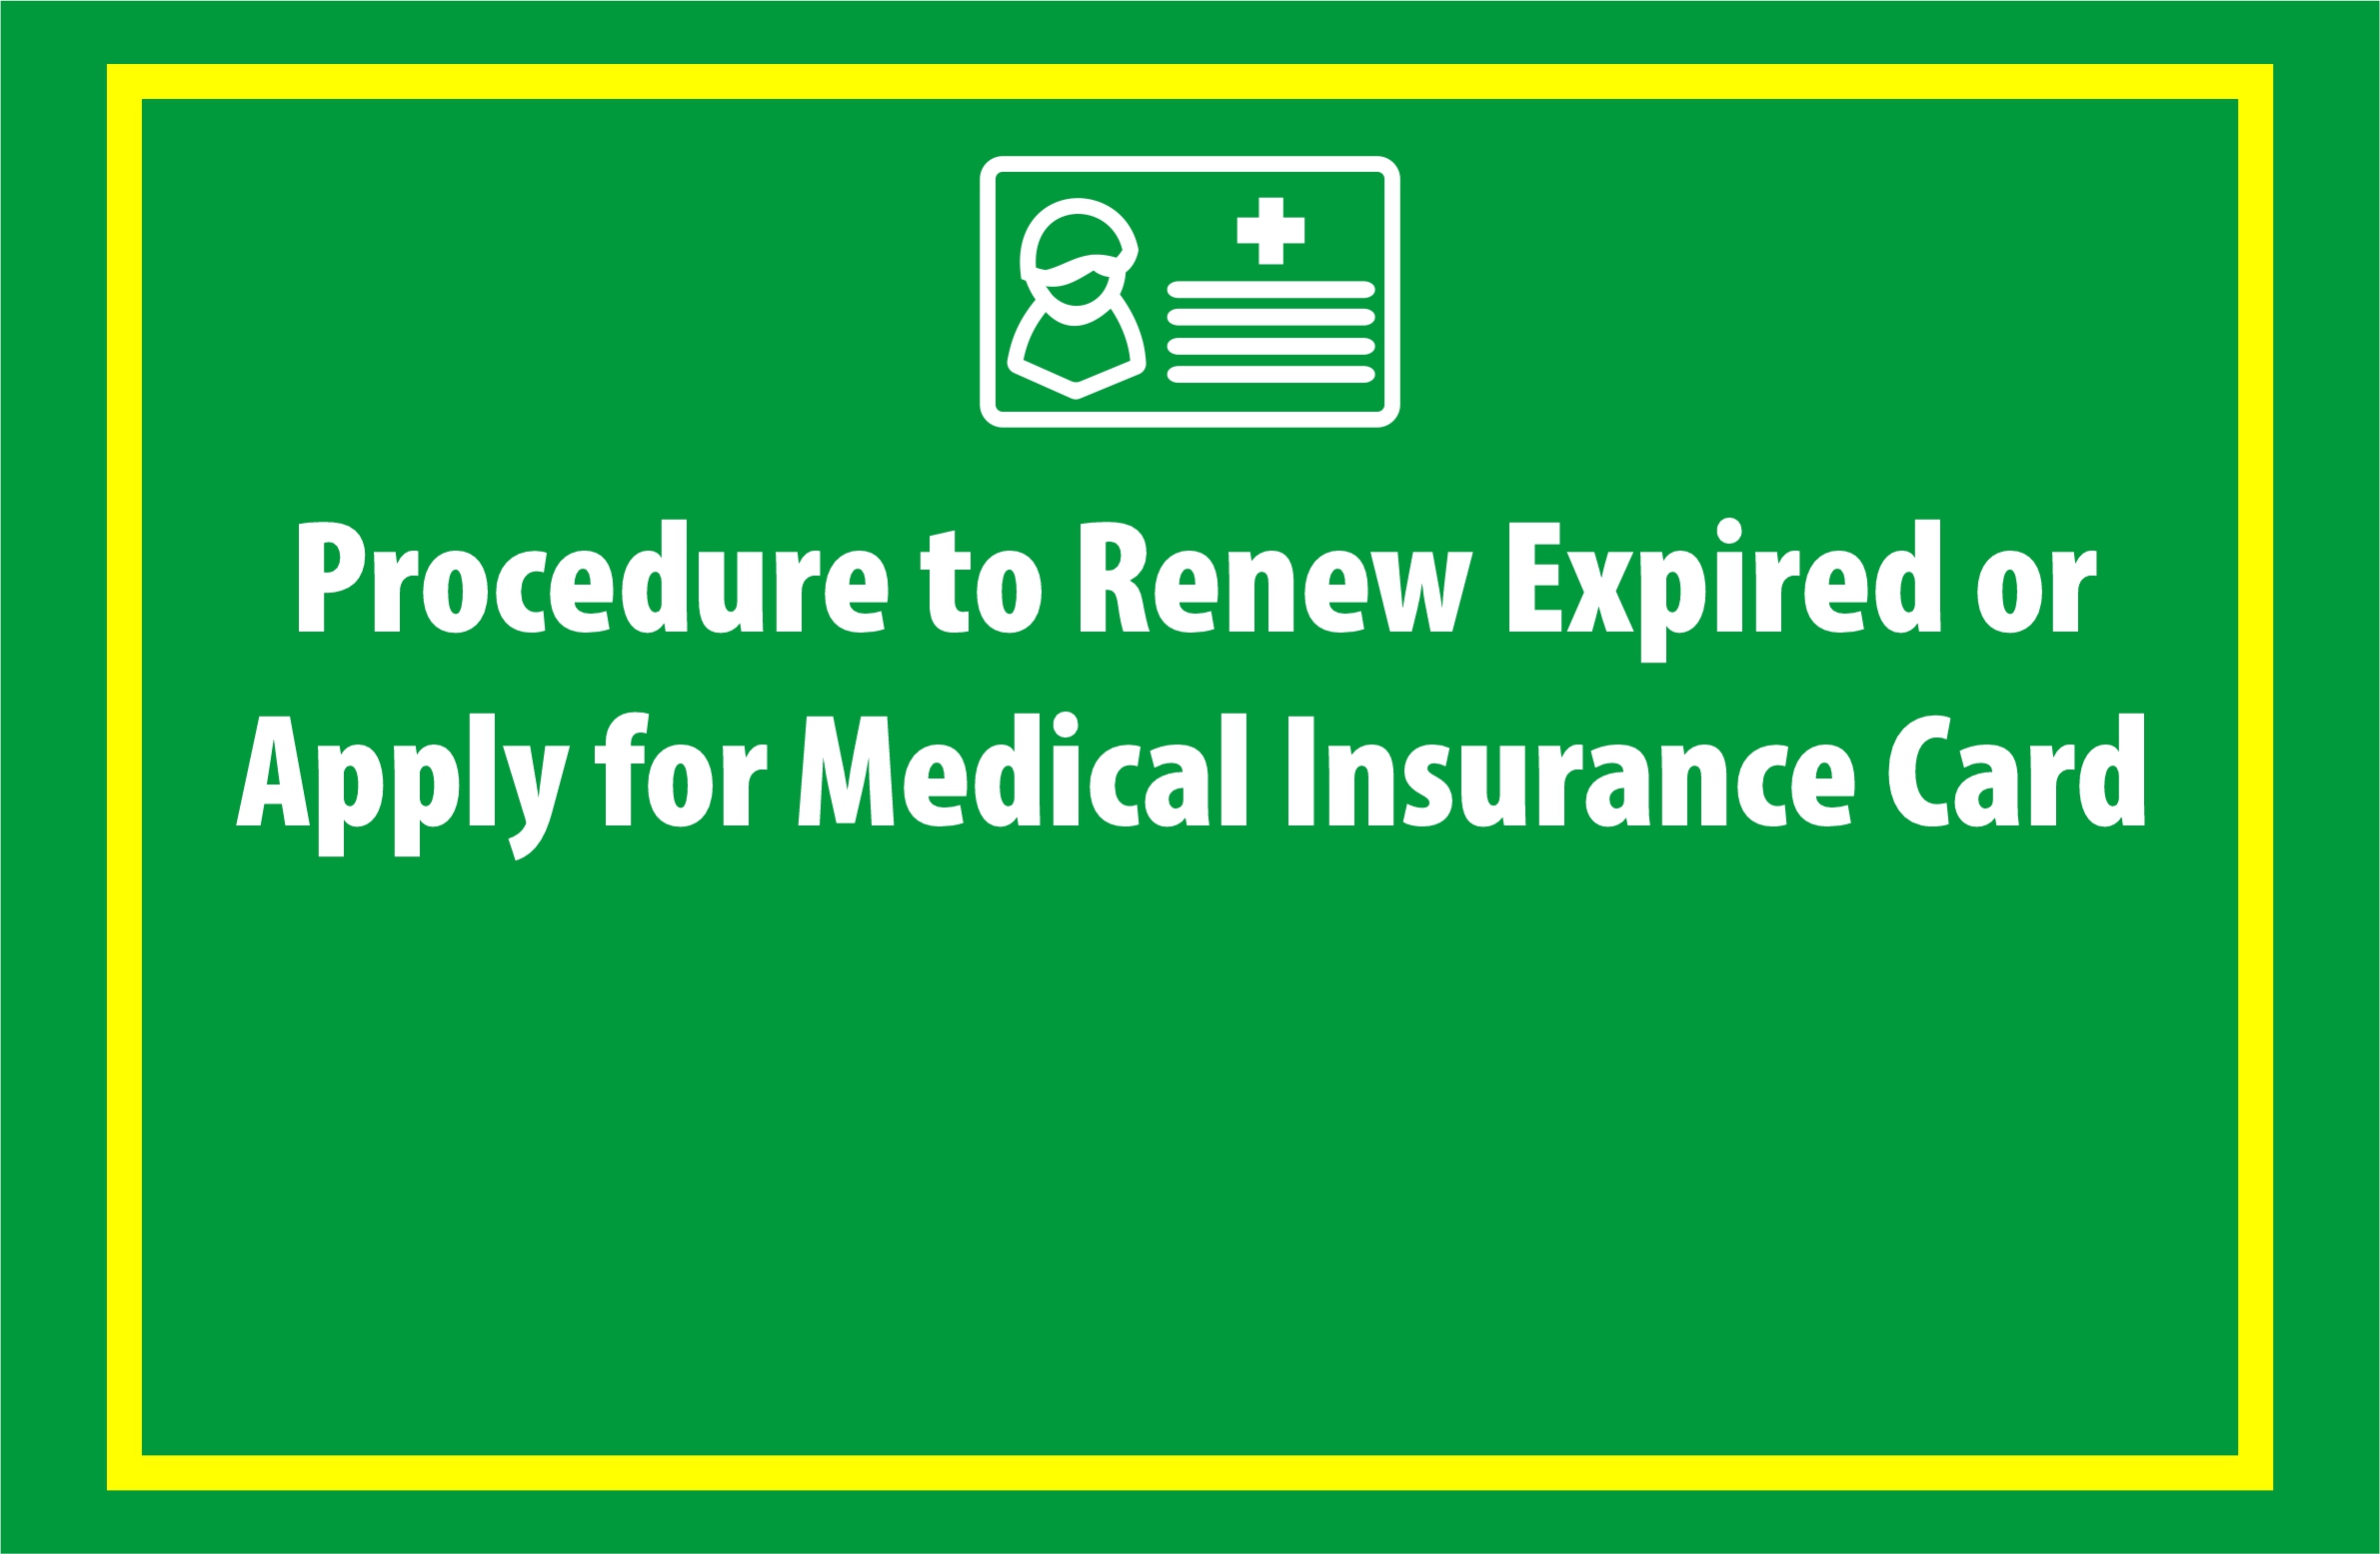 Procedure to Renew Expired or Apply for Medical Insurance Card 